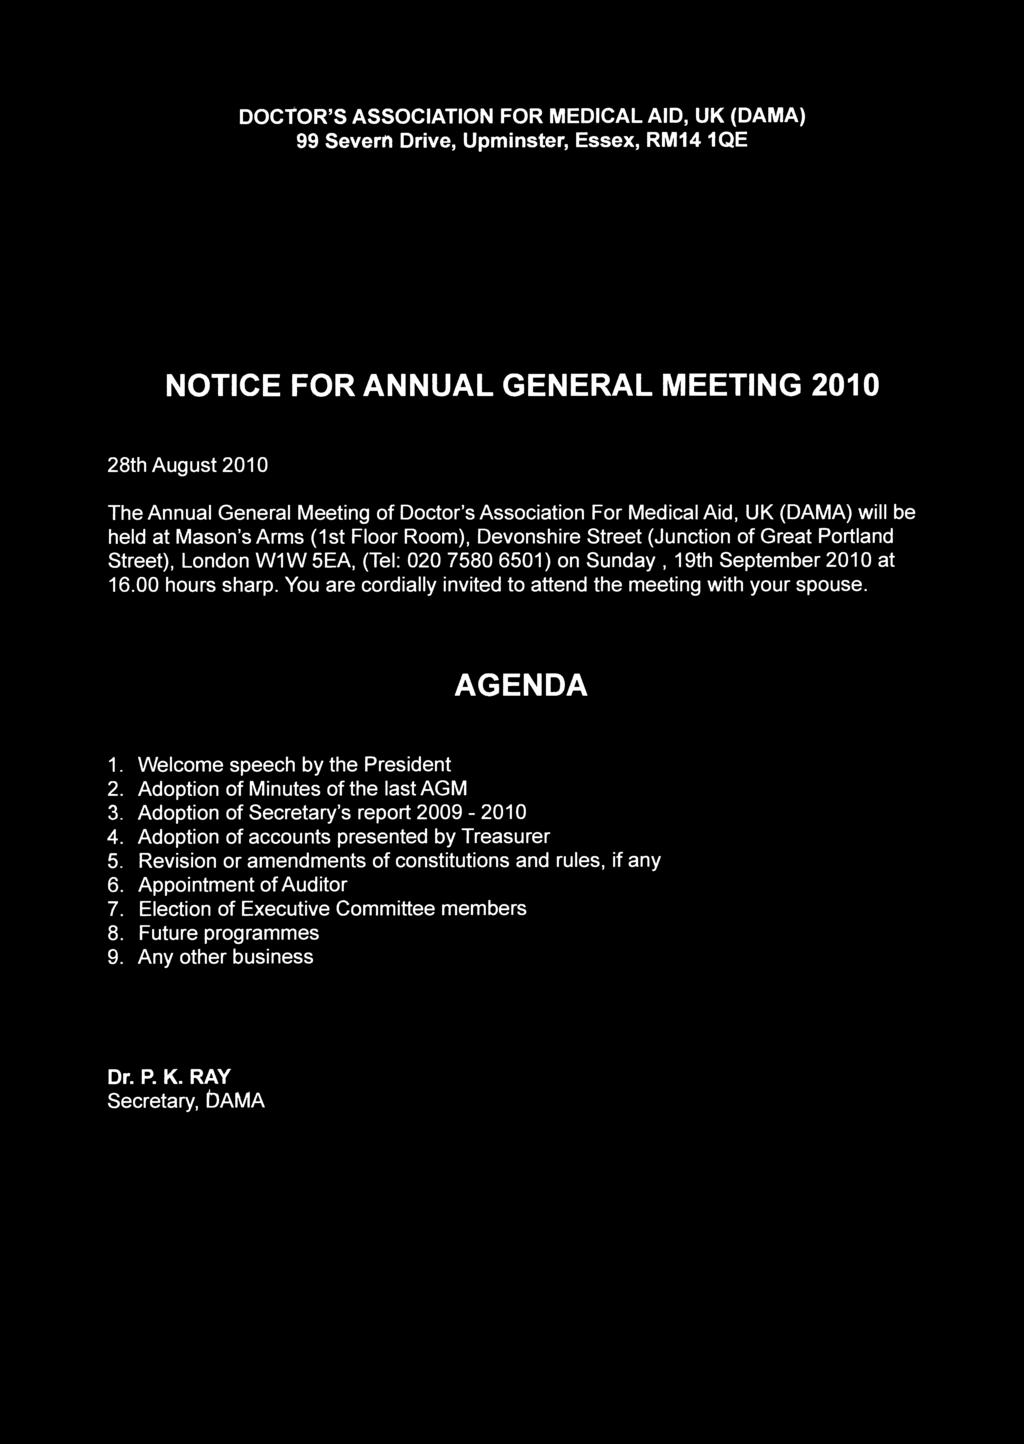 DOCTOR'S ASSOCIATION FOR MEDICAL AID, UK (DAMA) 99 Severn Drive, Upminster, Essex, RM14 1QE NOTICE FOR ANNUAL GENERAL MEETING 2010 28th August 2010 The Annual General Meeting of Doctor's Association